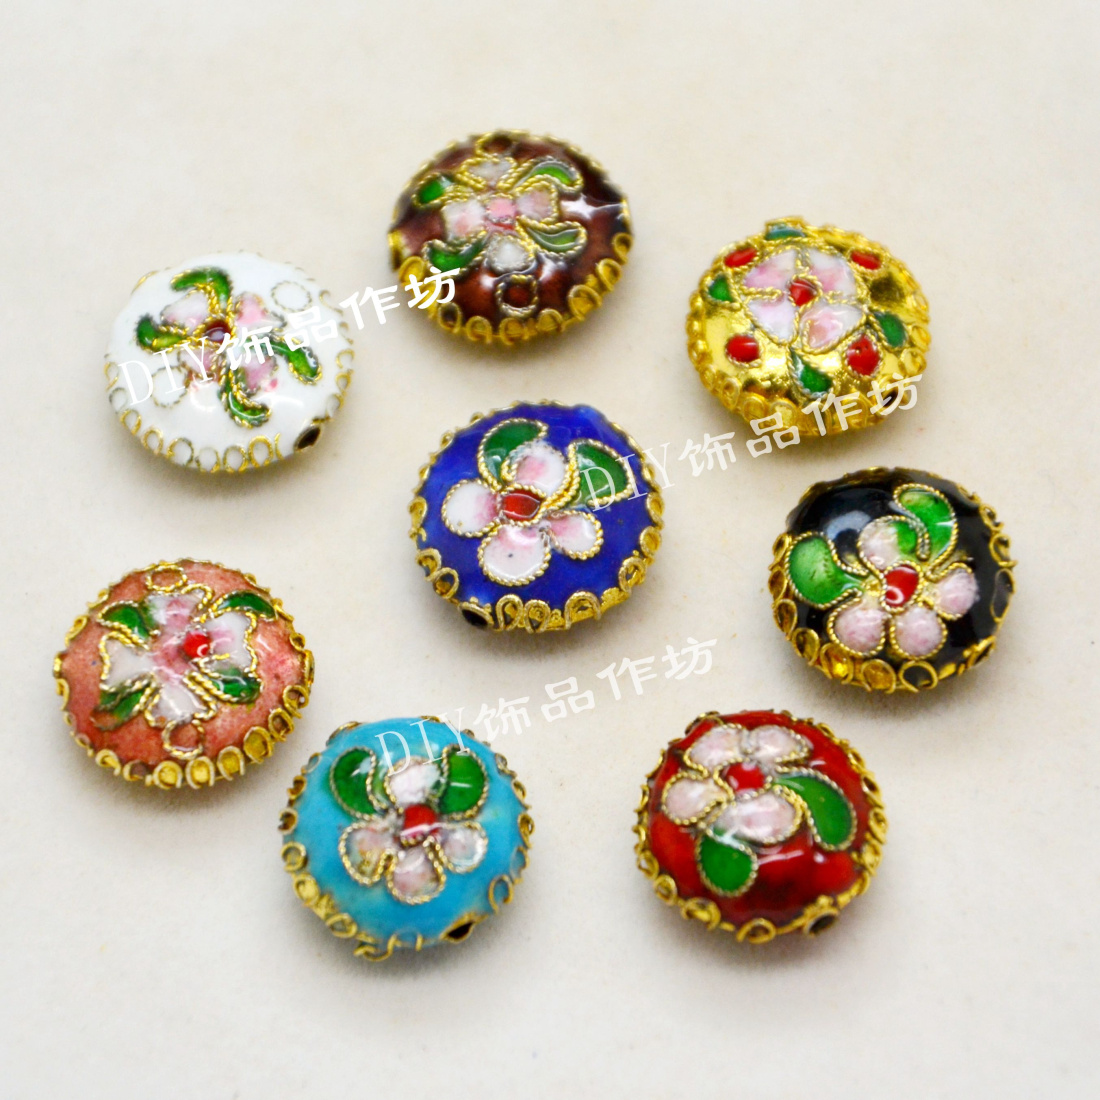 

10pcs Cloisonne Filigree 15mm Oblate Floral Beaded Whoesale Handcrafts Copper Enamel Ethnic Beads Accessories DIY Jewellery Making